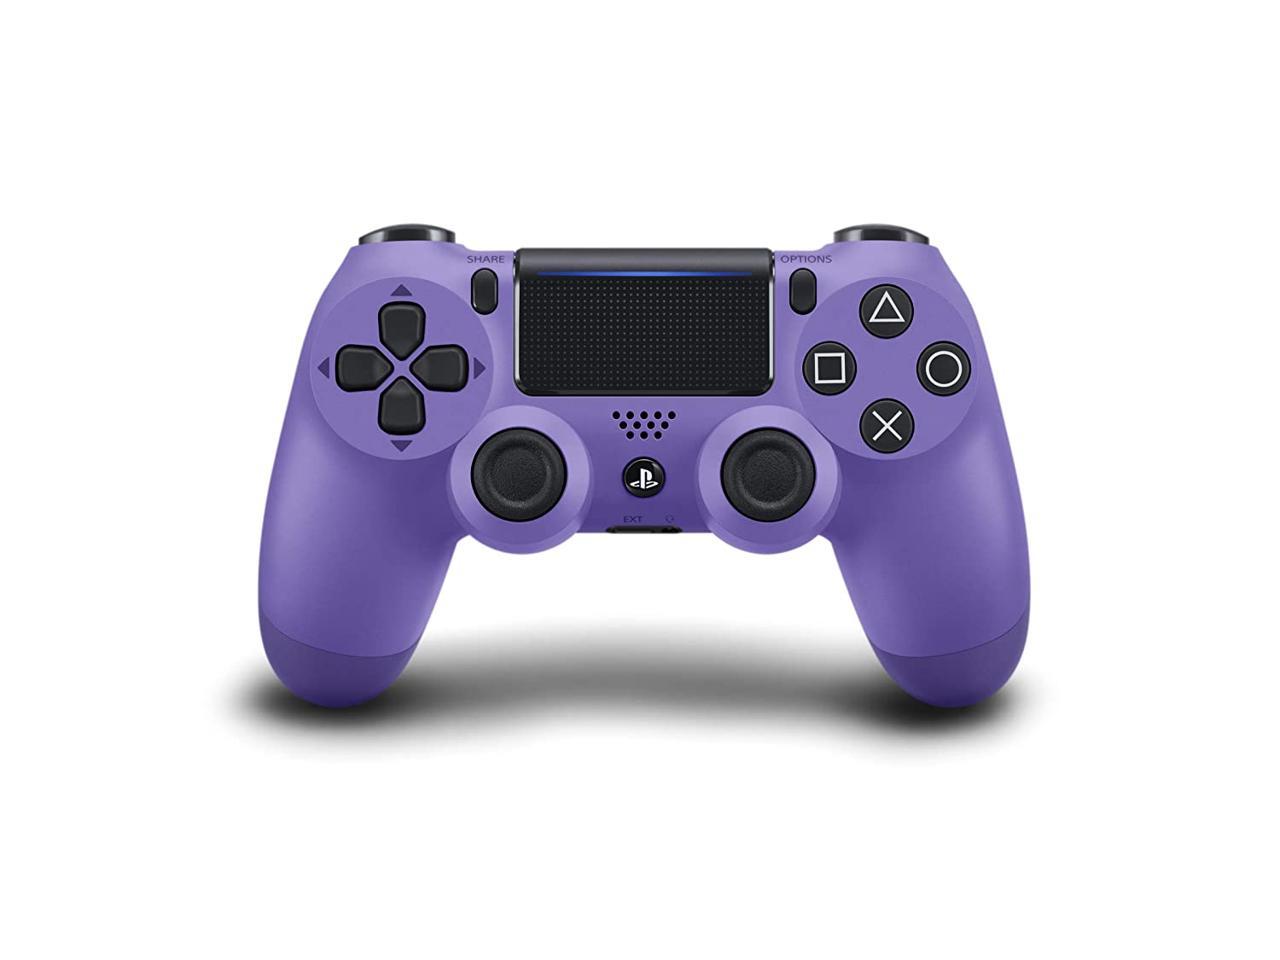 PS4 Wireless Controller Game Pad for SONY PlayStation 4 Dualshock - Electric Purple,Hot PS4 Wireless Controller Game Pad for SONY PlayStation Dualshock 4 Camouflage